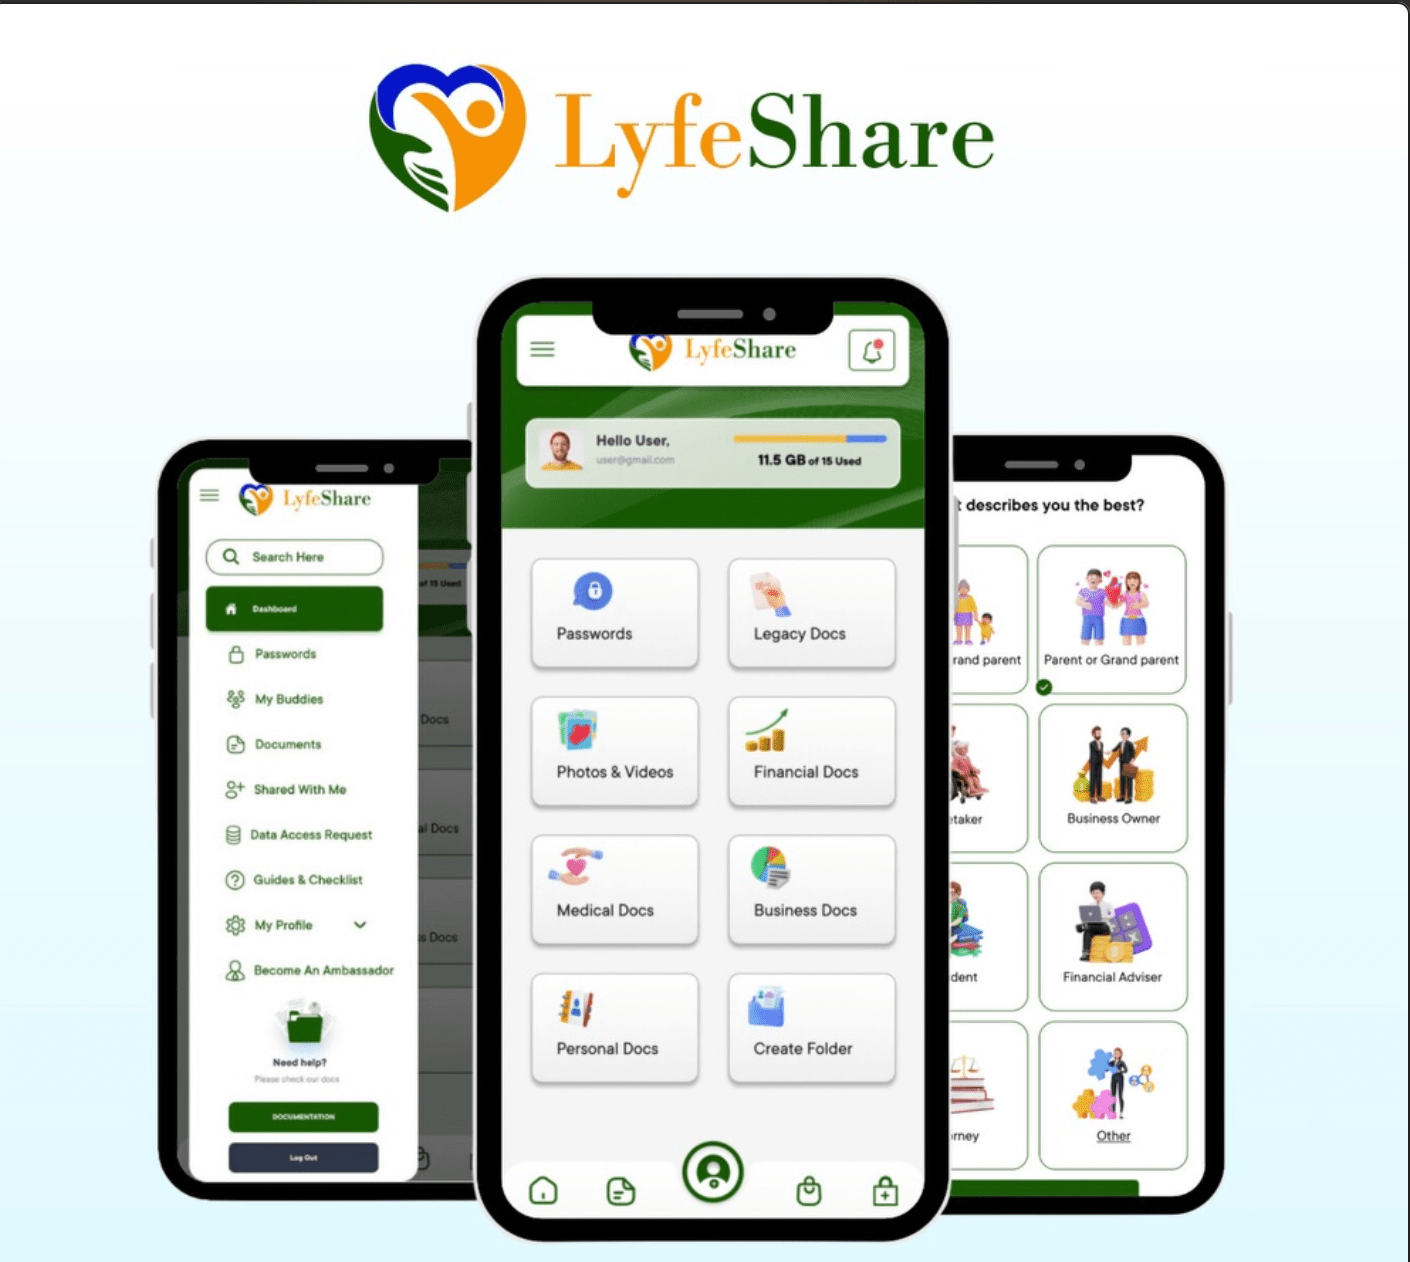 LyfeShare Aims To Take The Hassle Out of Estate Planning